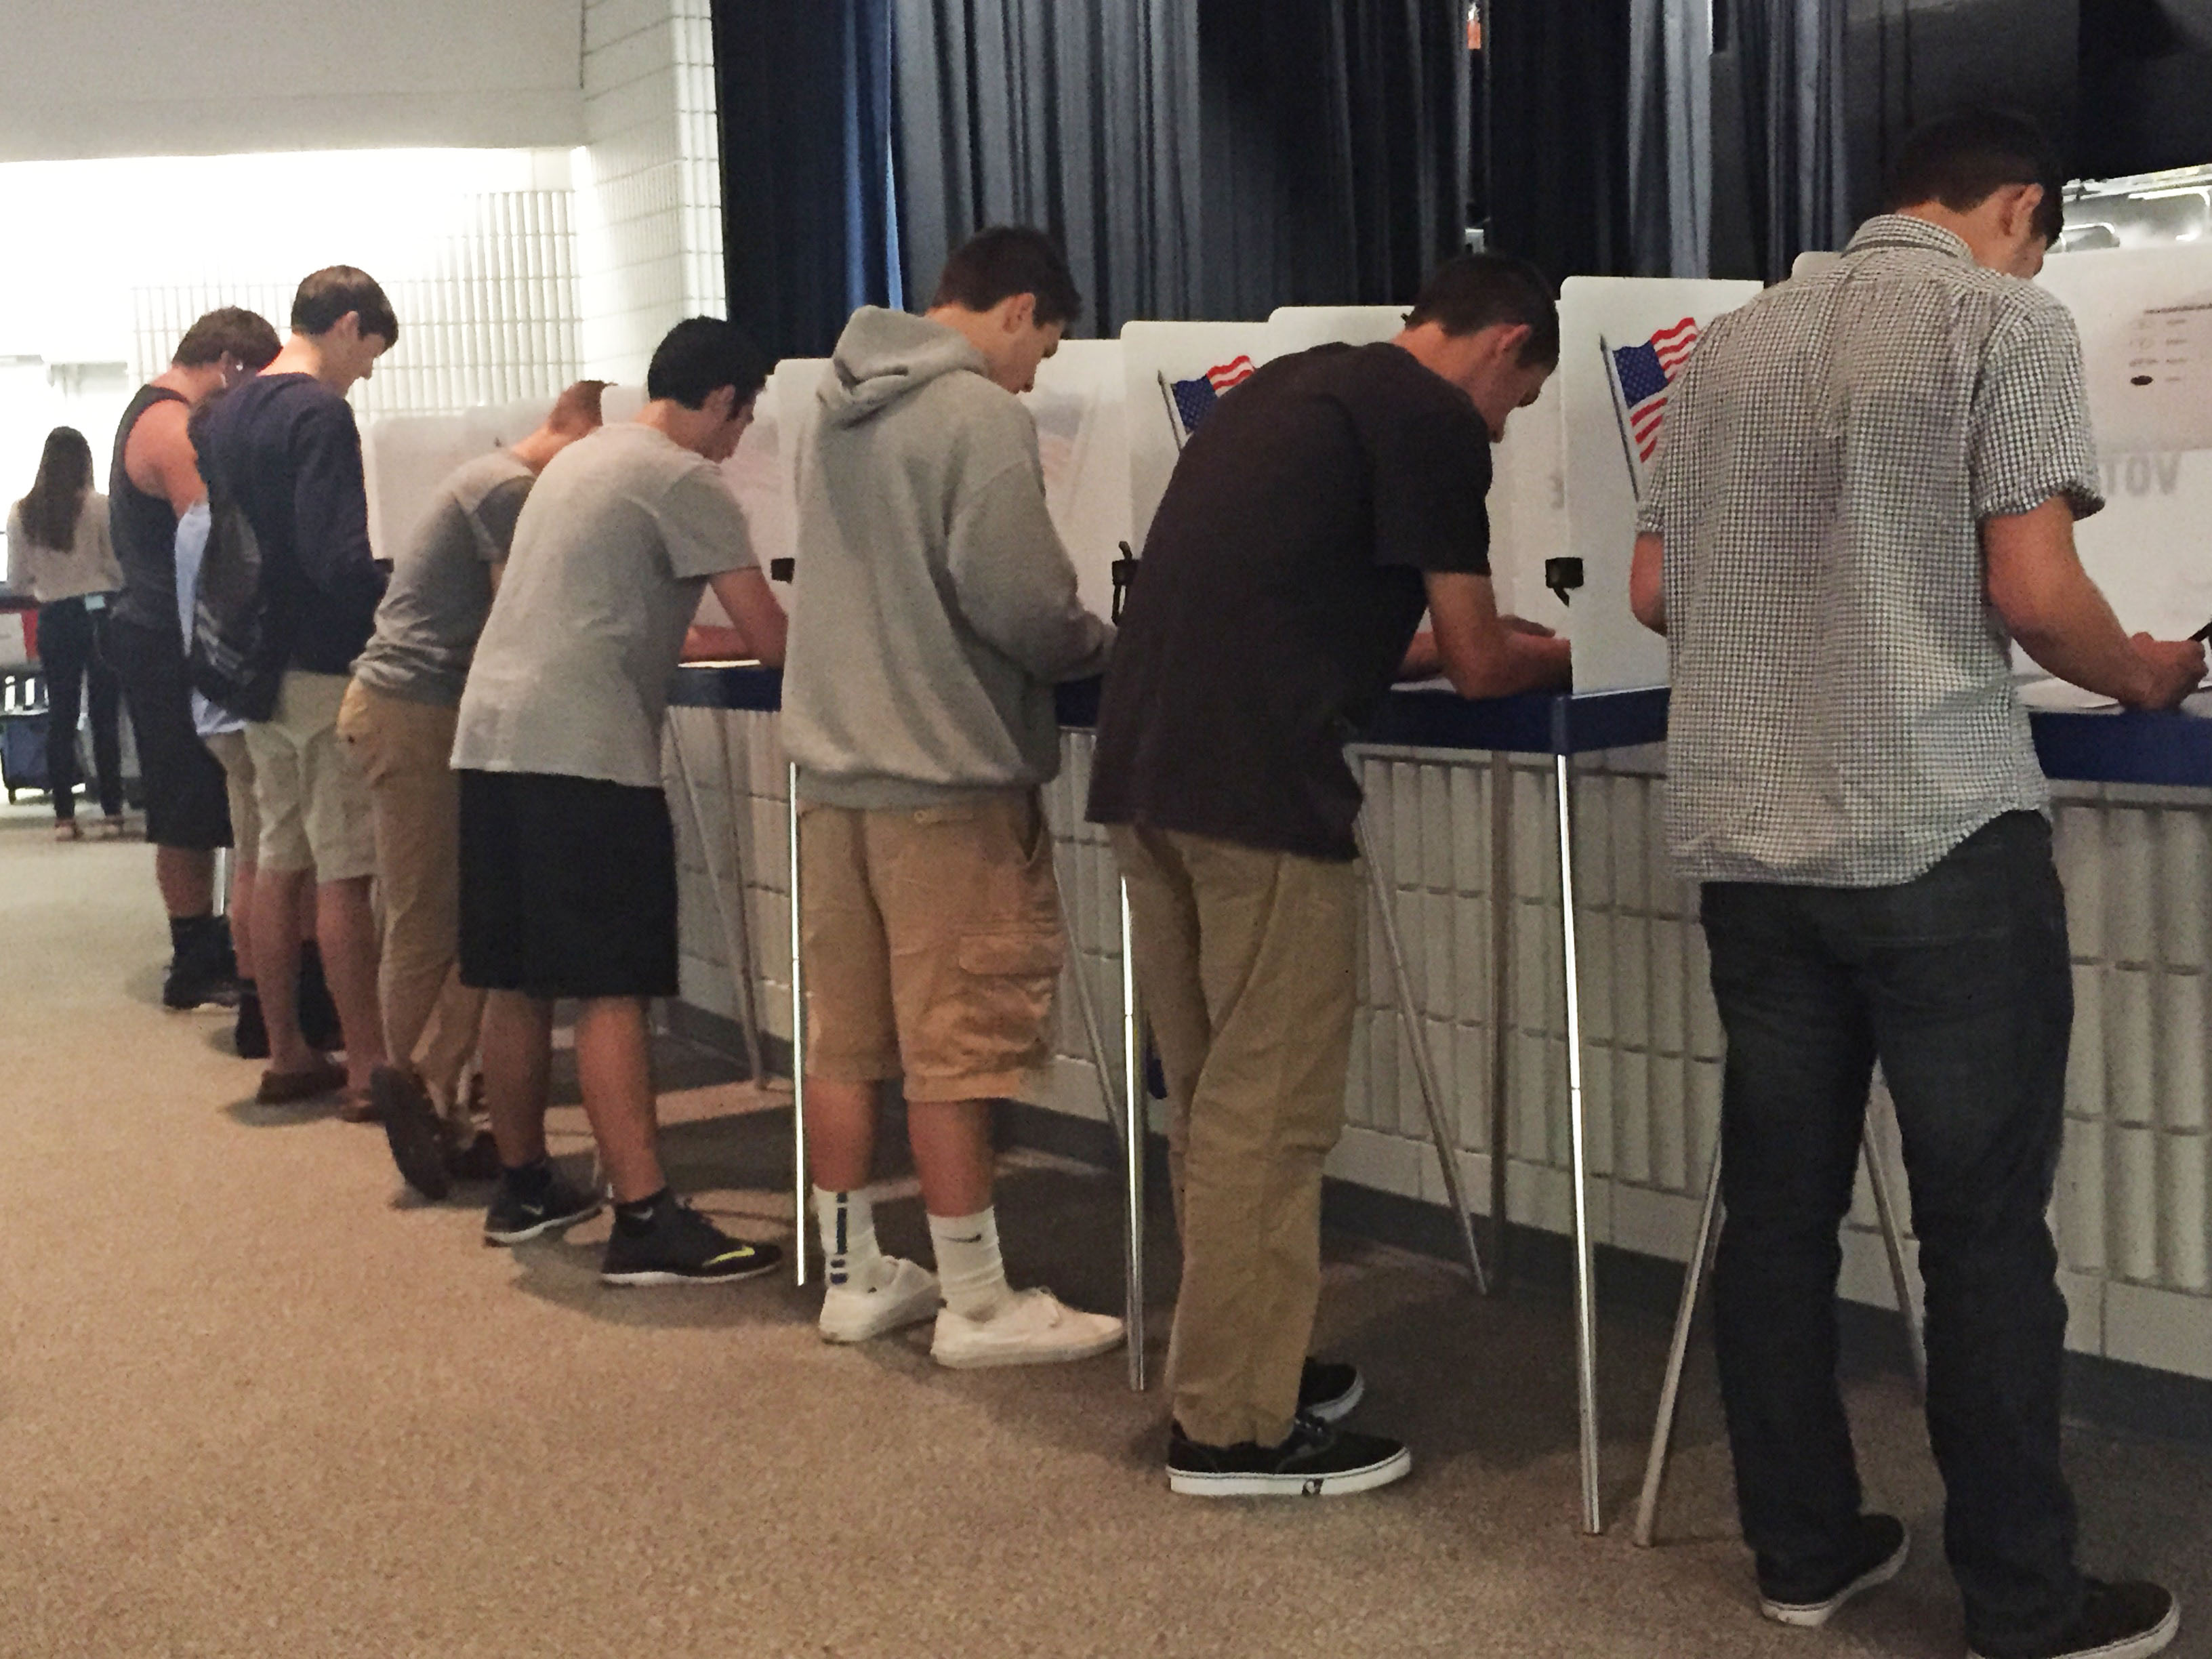 Photo pf students in voting booths filling out ballots for a school election